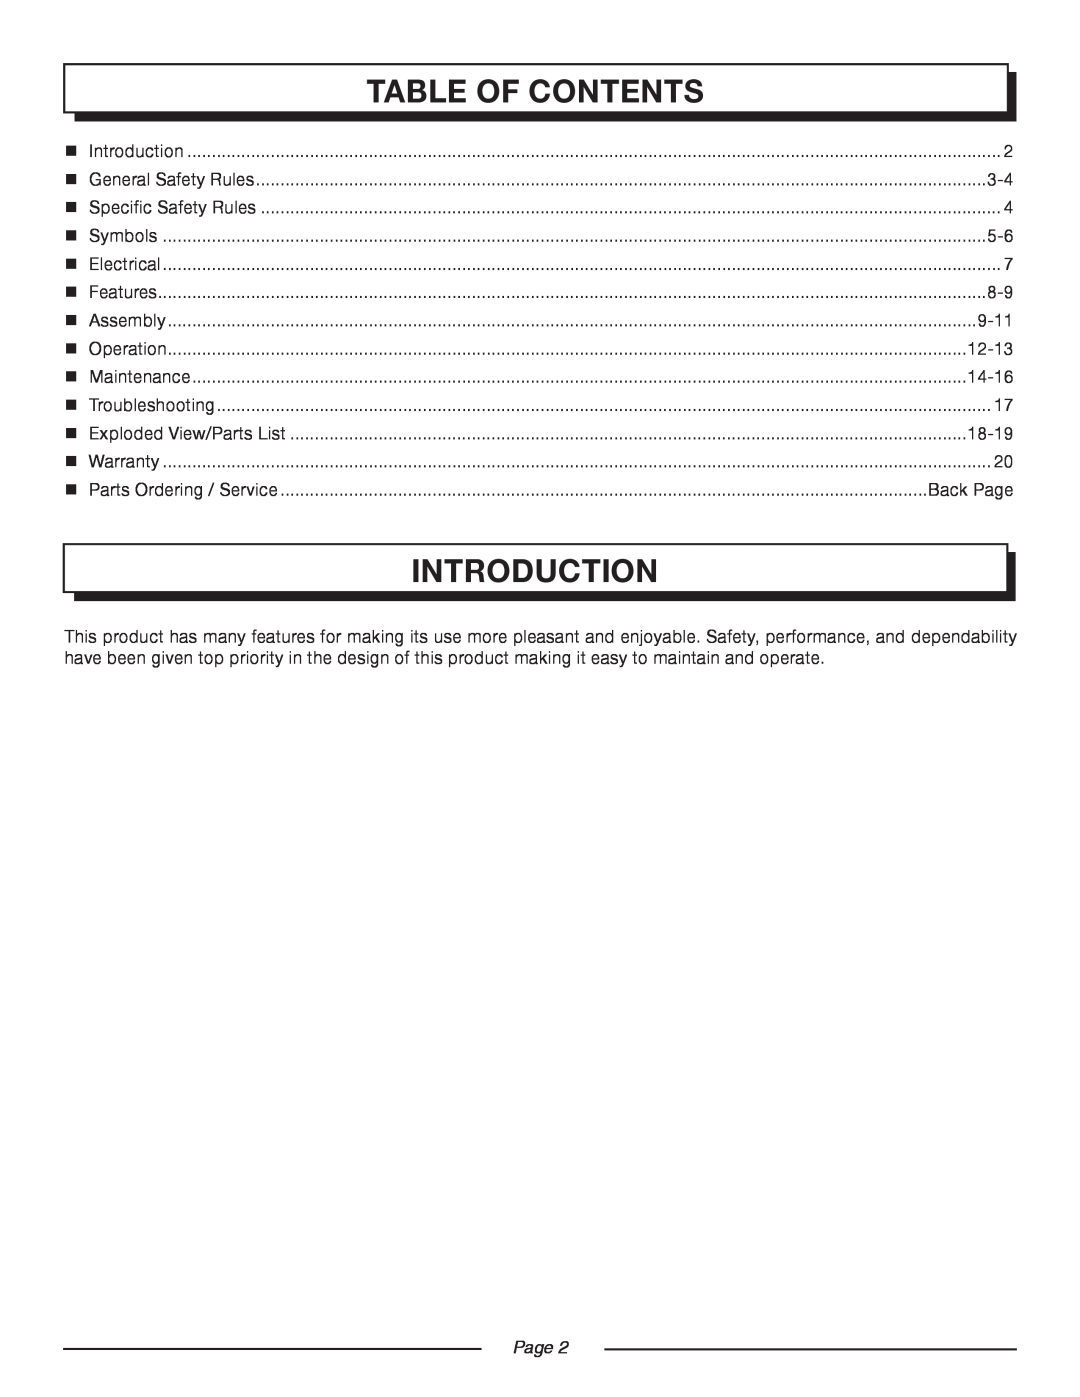 Homelite UT13118, UT13120 manual Introduction, Table Of Contents, 9-11, 12-13, 14-16, 18-19, Back Page 